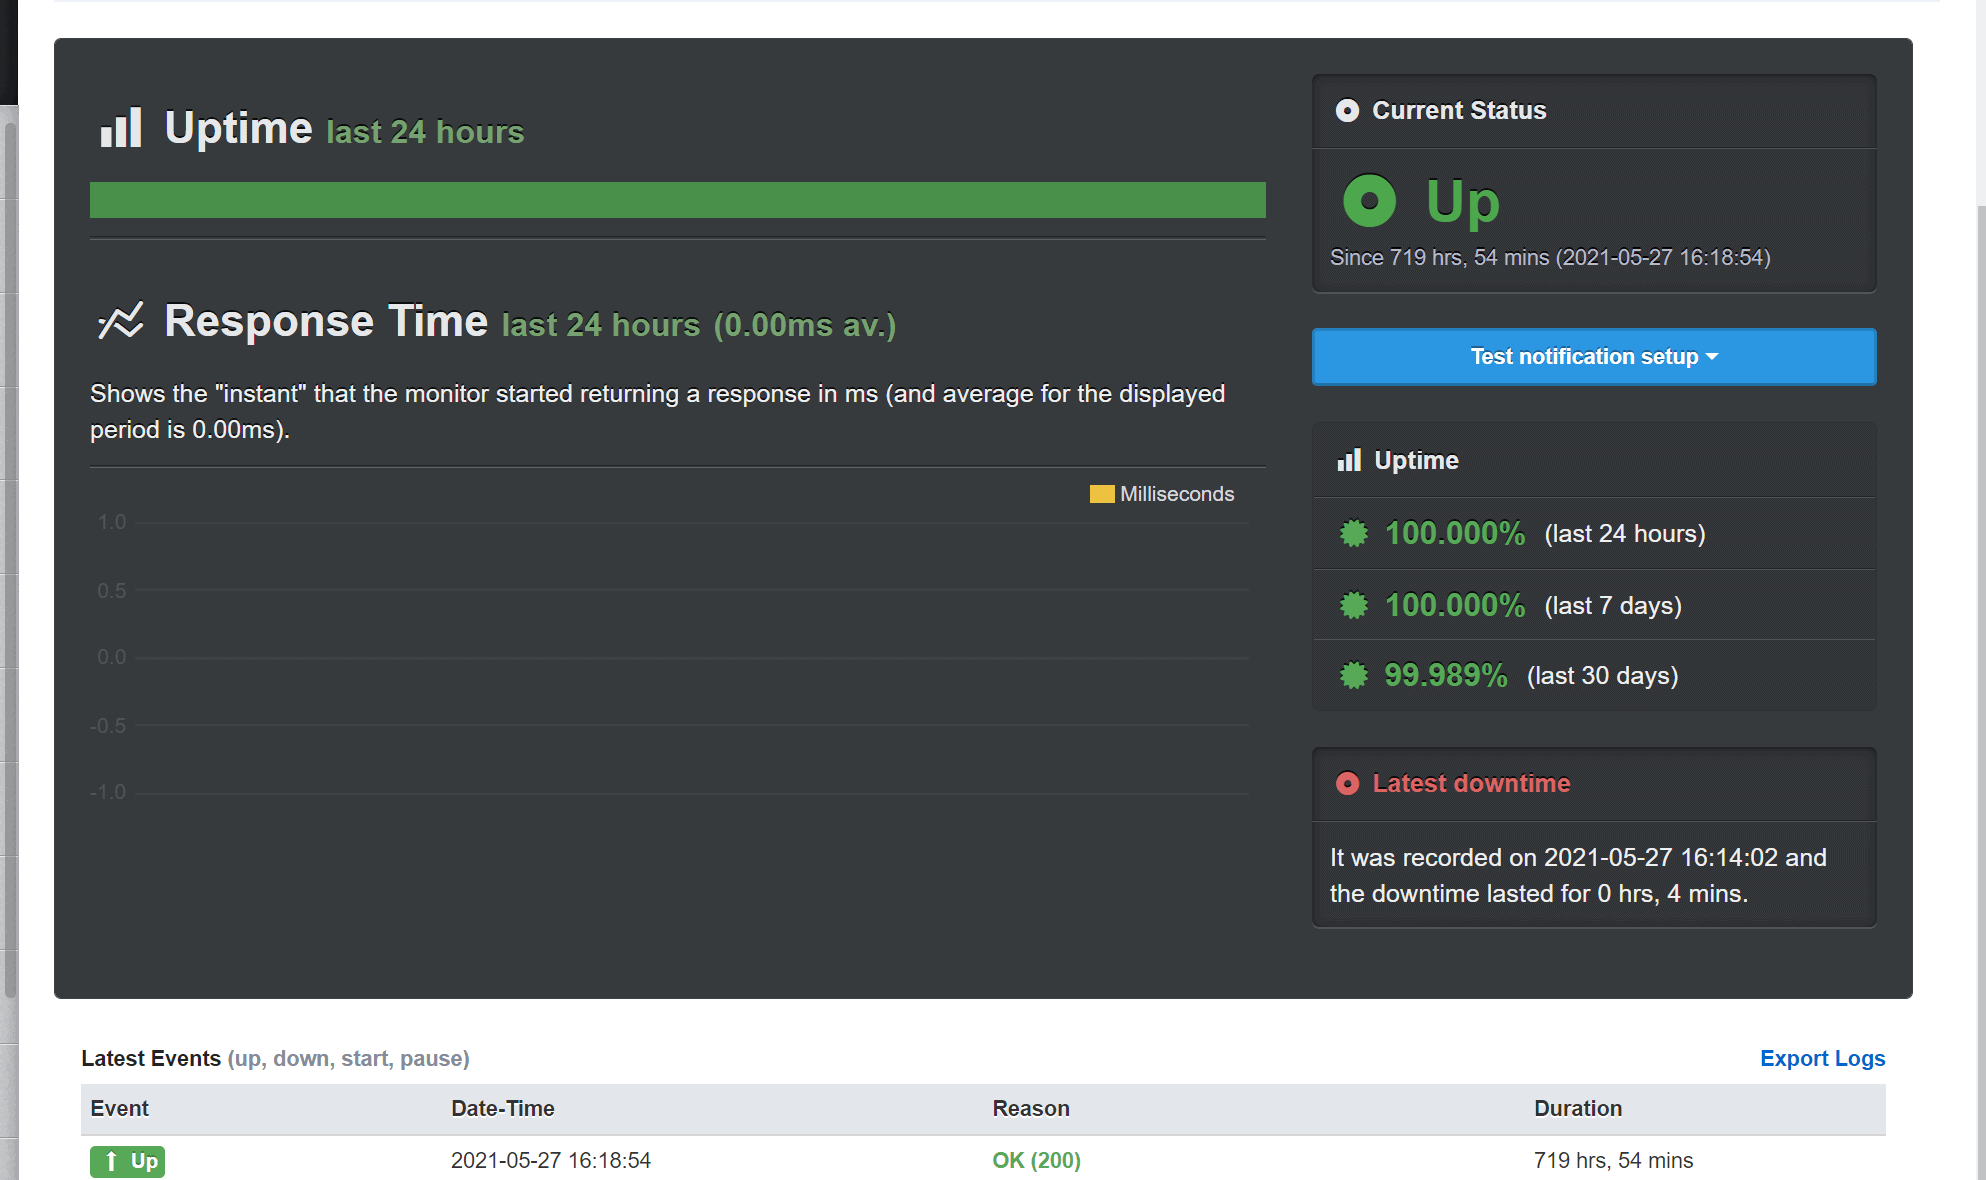 Uptime hosting and uptime speed